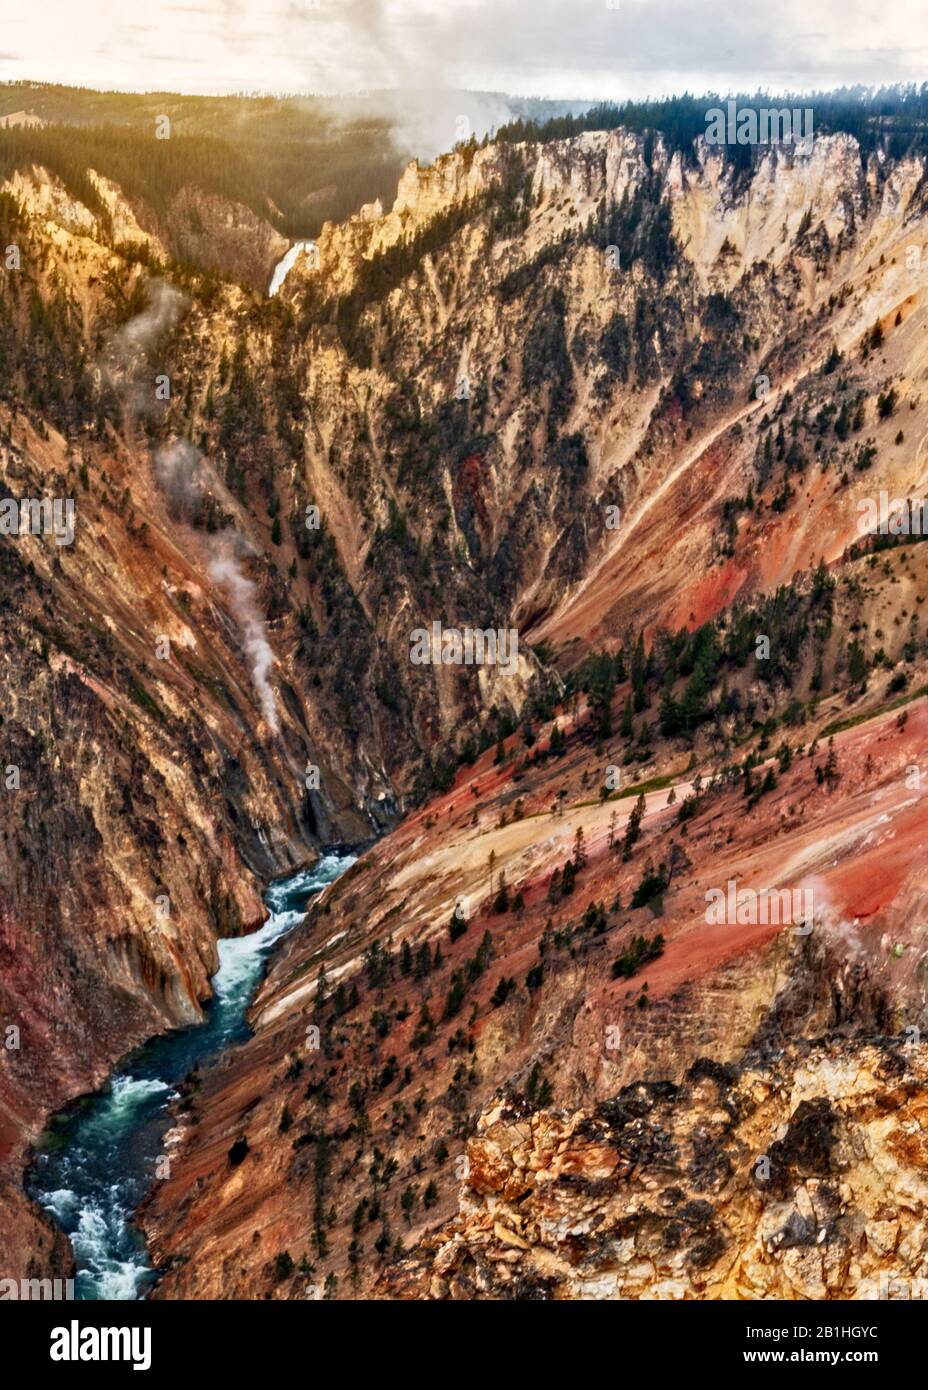 Deep canyon with colorful orange, red and yellow walls, early morning sunrise and river deep at the bottom of the canyon with green forest on top of m. Stock Photo